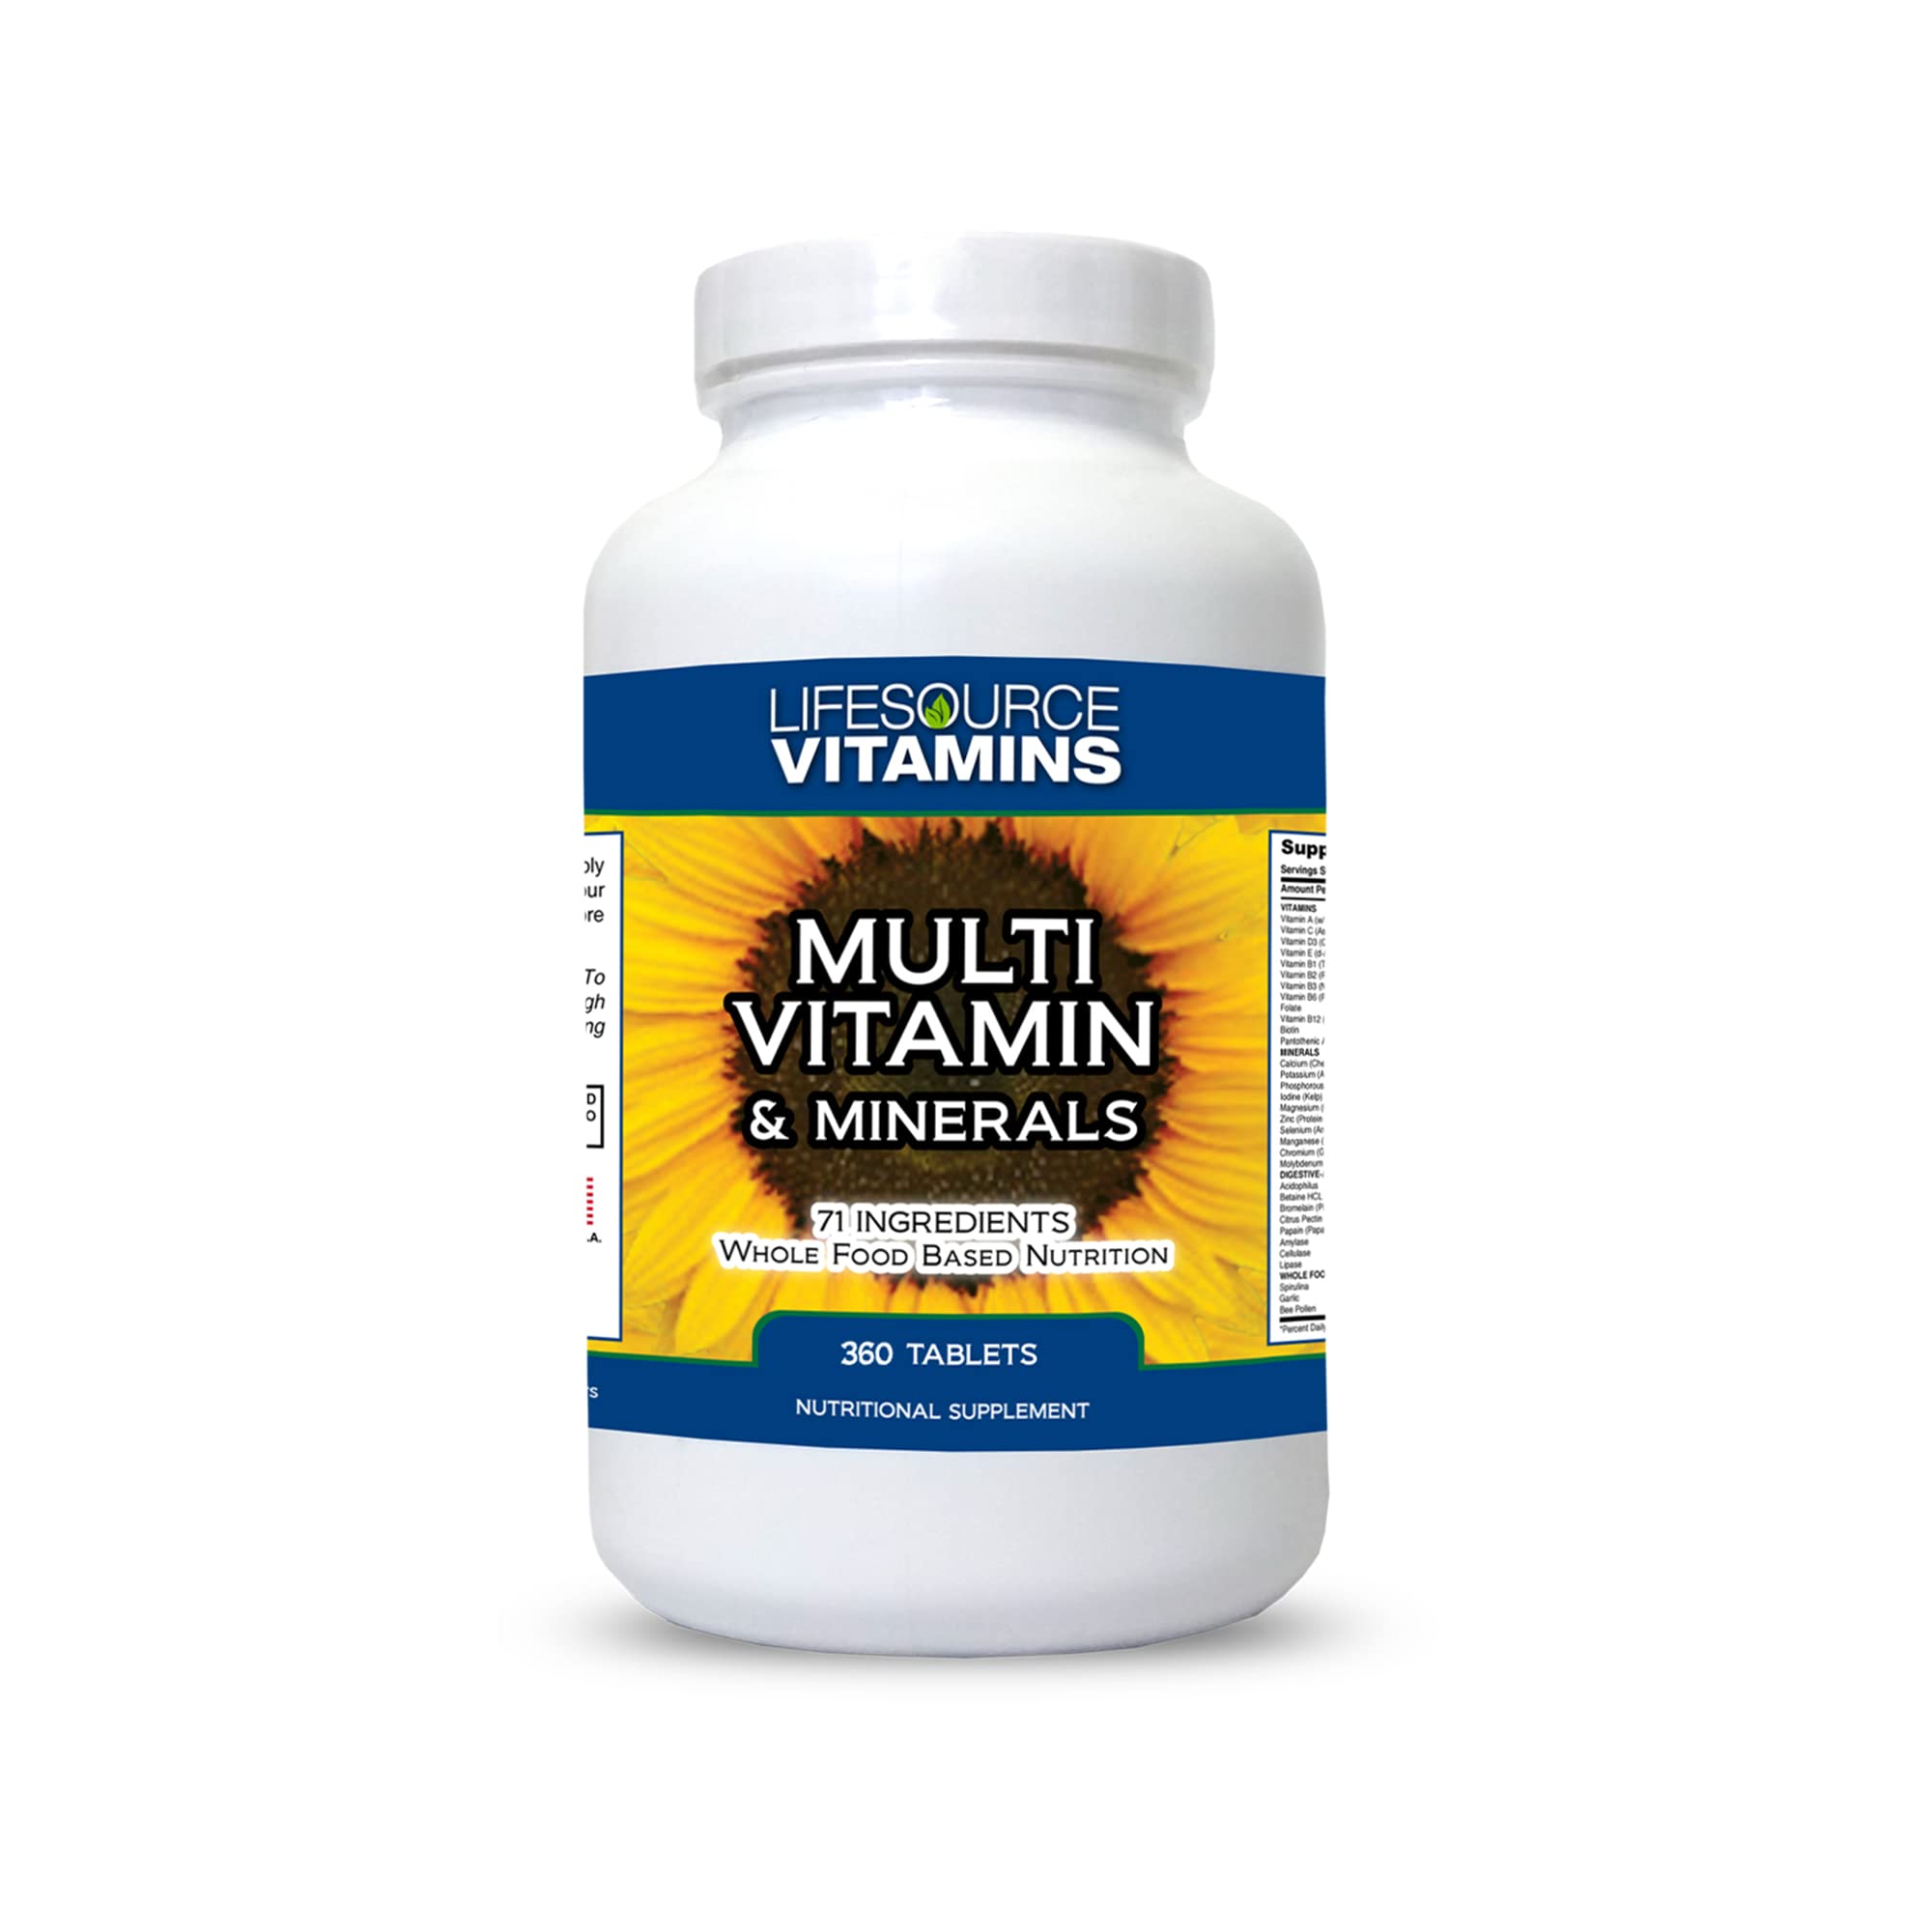 LifeSource Vitamins Whole Food Multivitamin & Minerals with 71 Natural Ingredients, Non-GMO Daily Whole Food Vitamin, 360 Tablets - 4 Month Supply